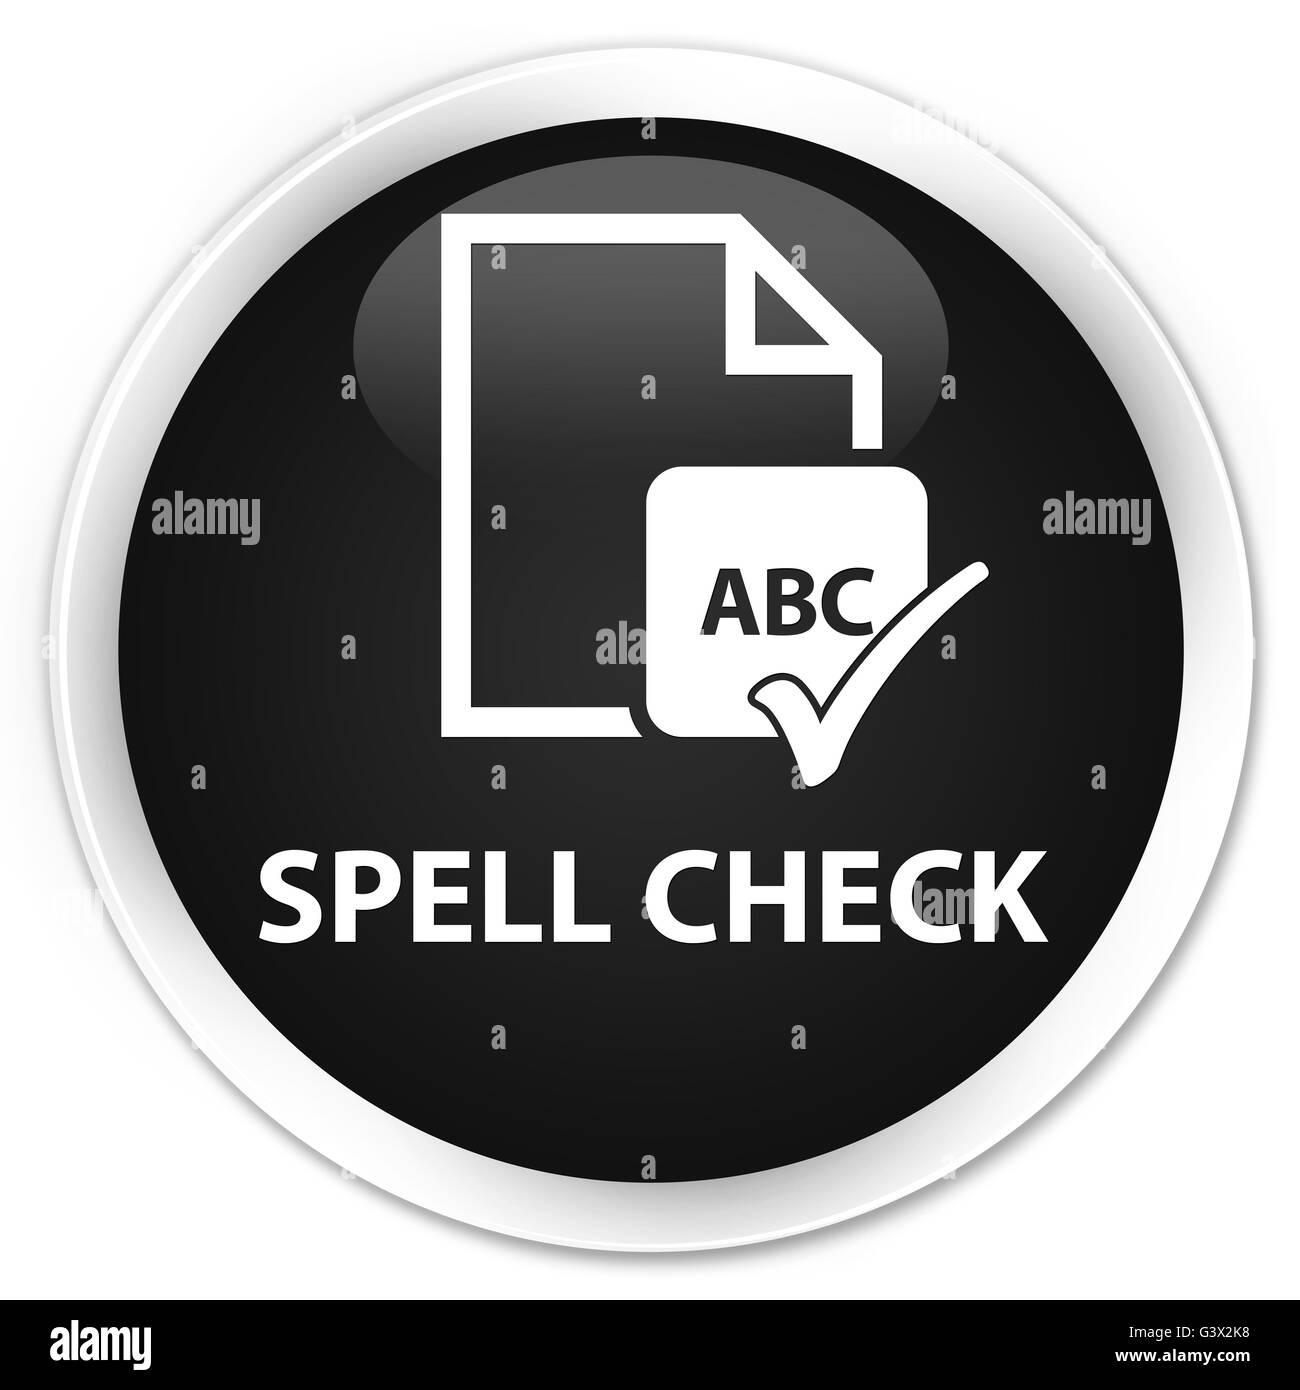 Spell check isolated on premium black round button abstract illustration Stock Photo